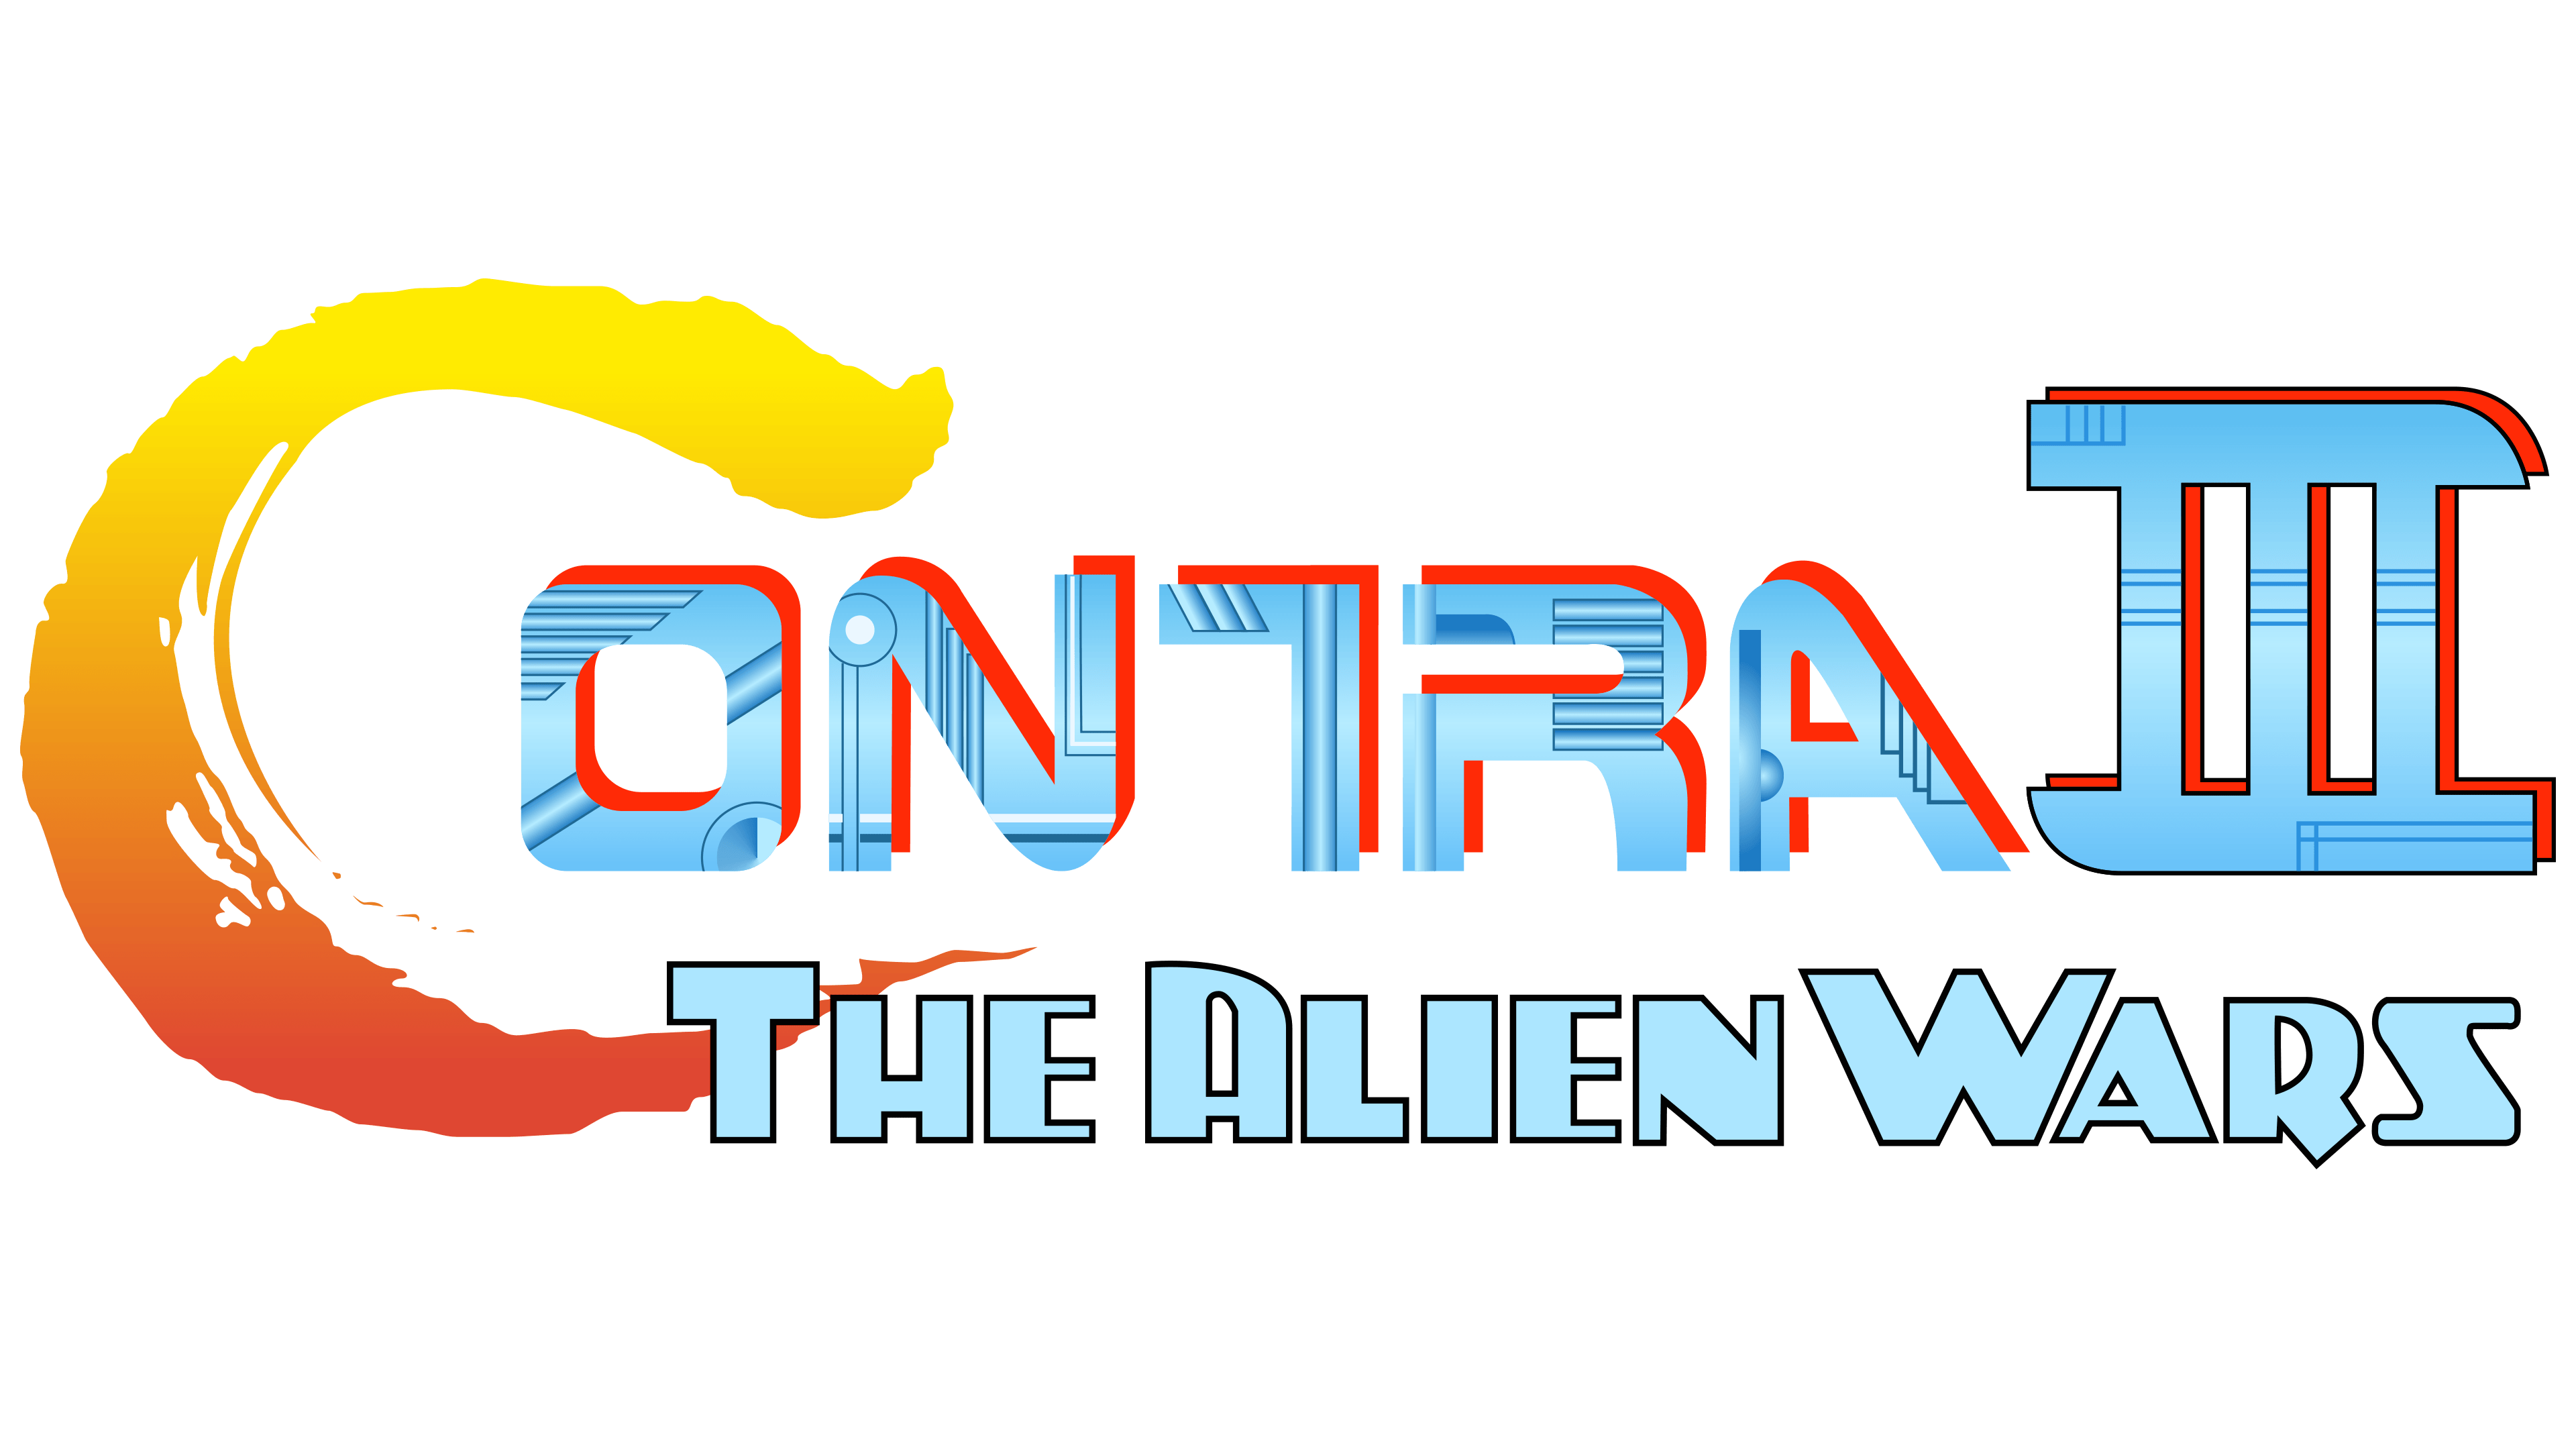 Contra Logo - Contra III: The Alien Wars Details - LaunchBox Games Database